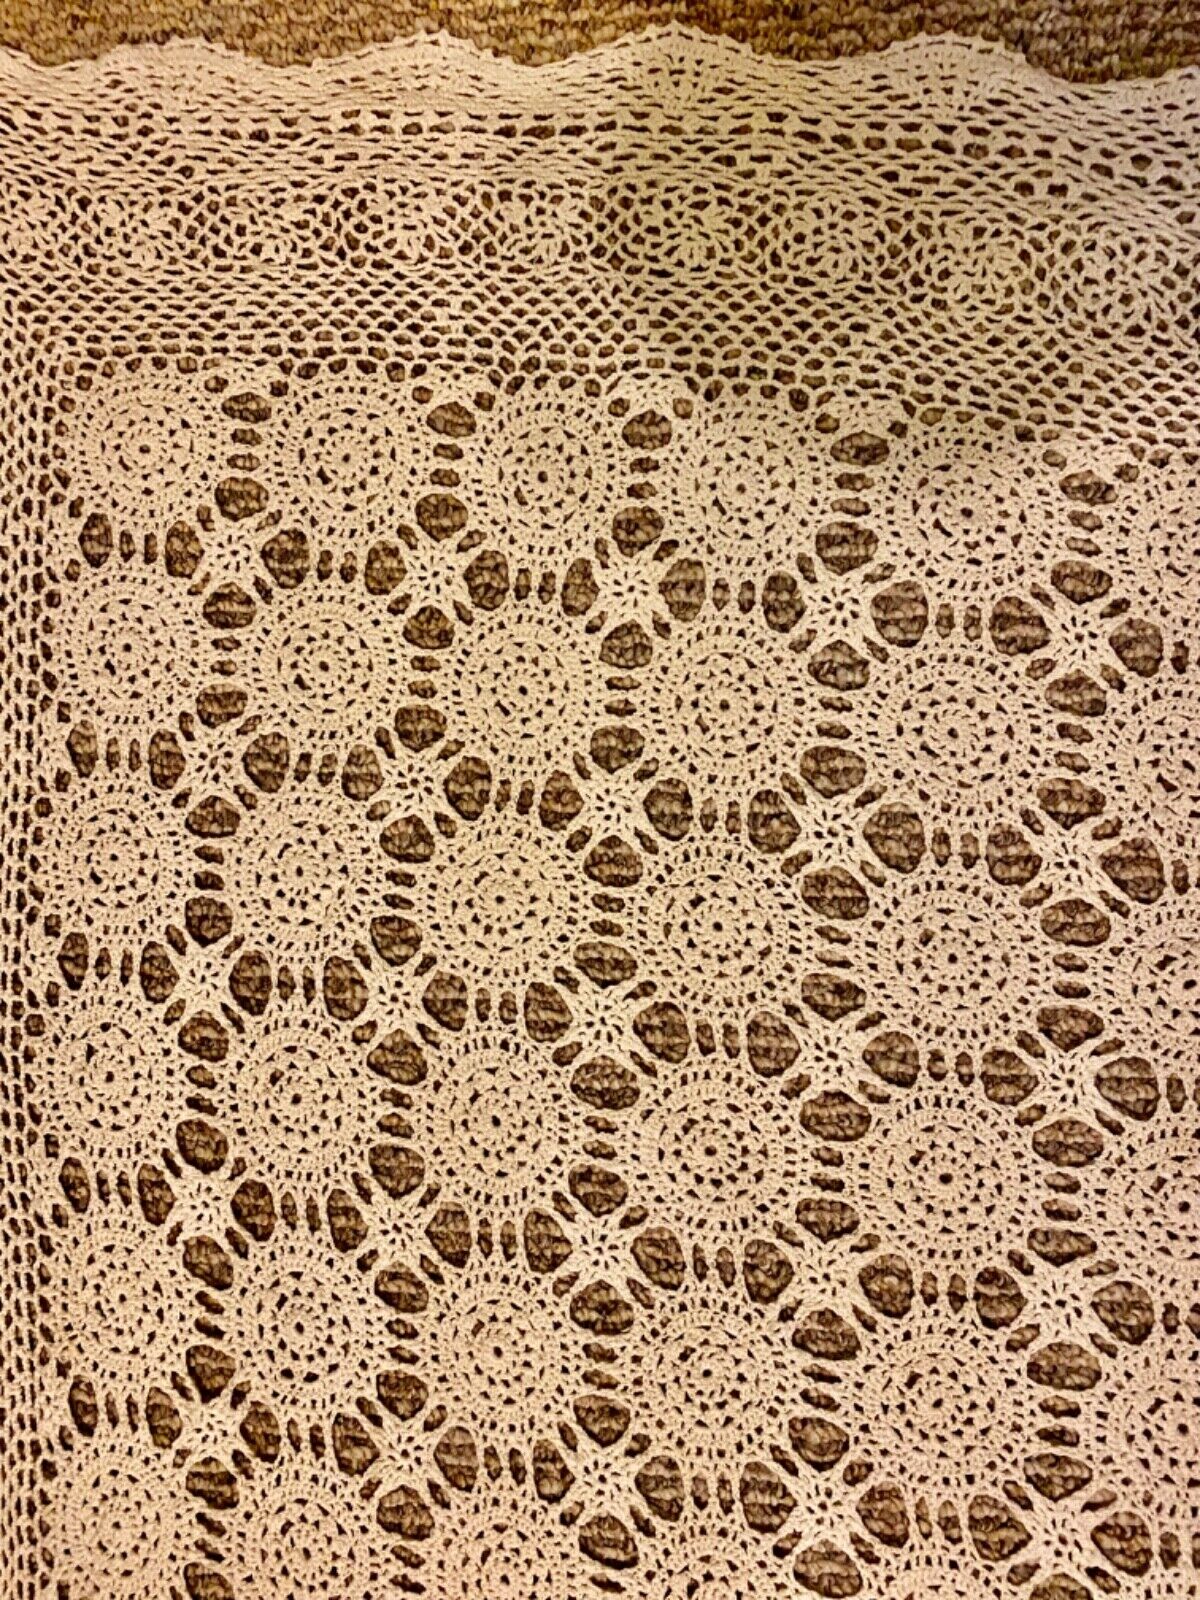 Vintage Large Hand Crocheted Beige Cotton Tablecloth 104